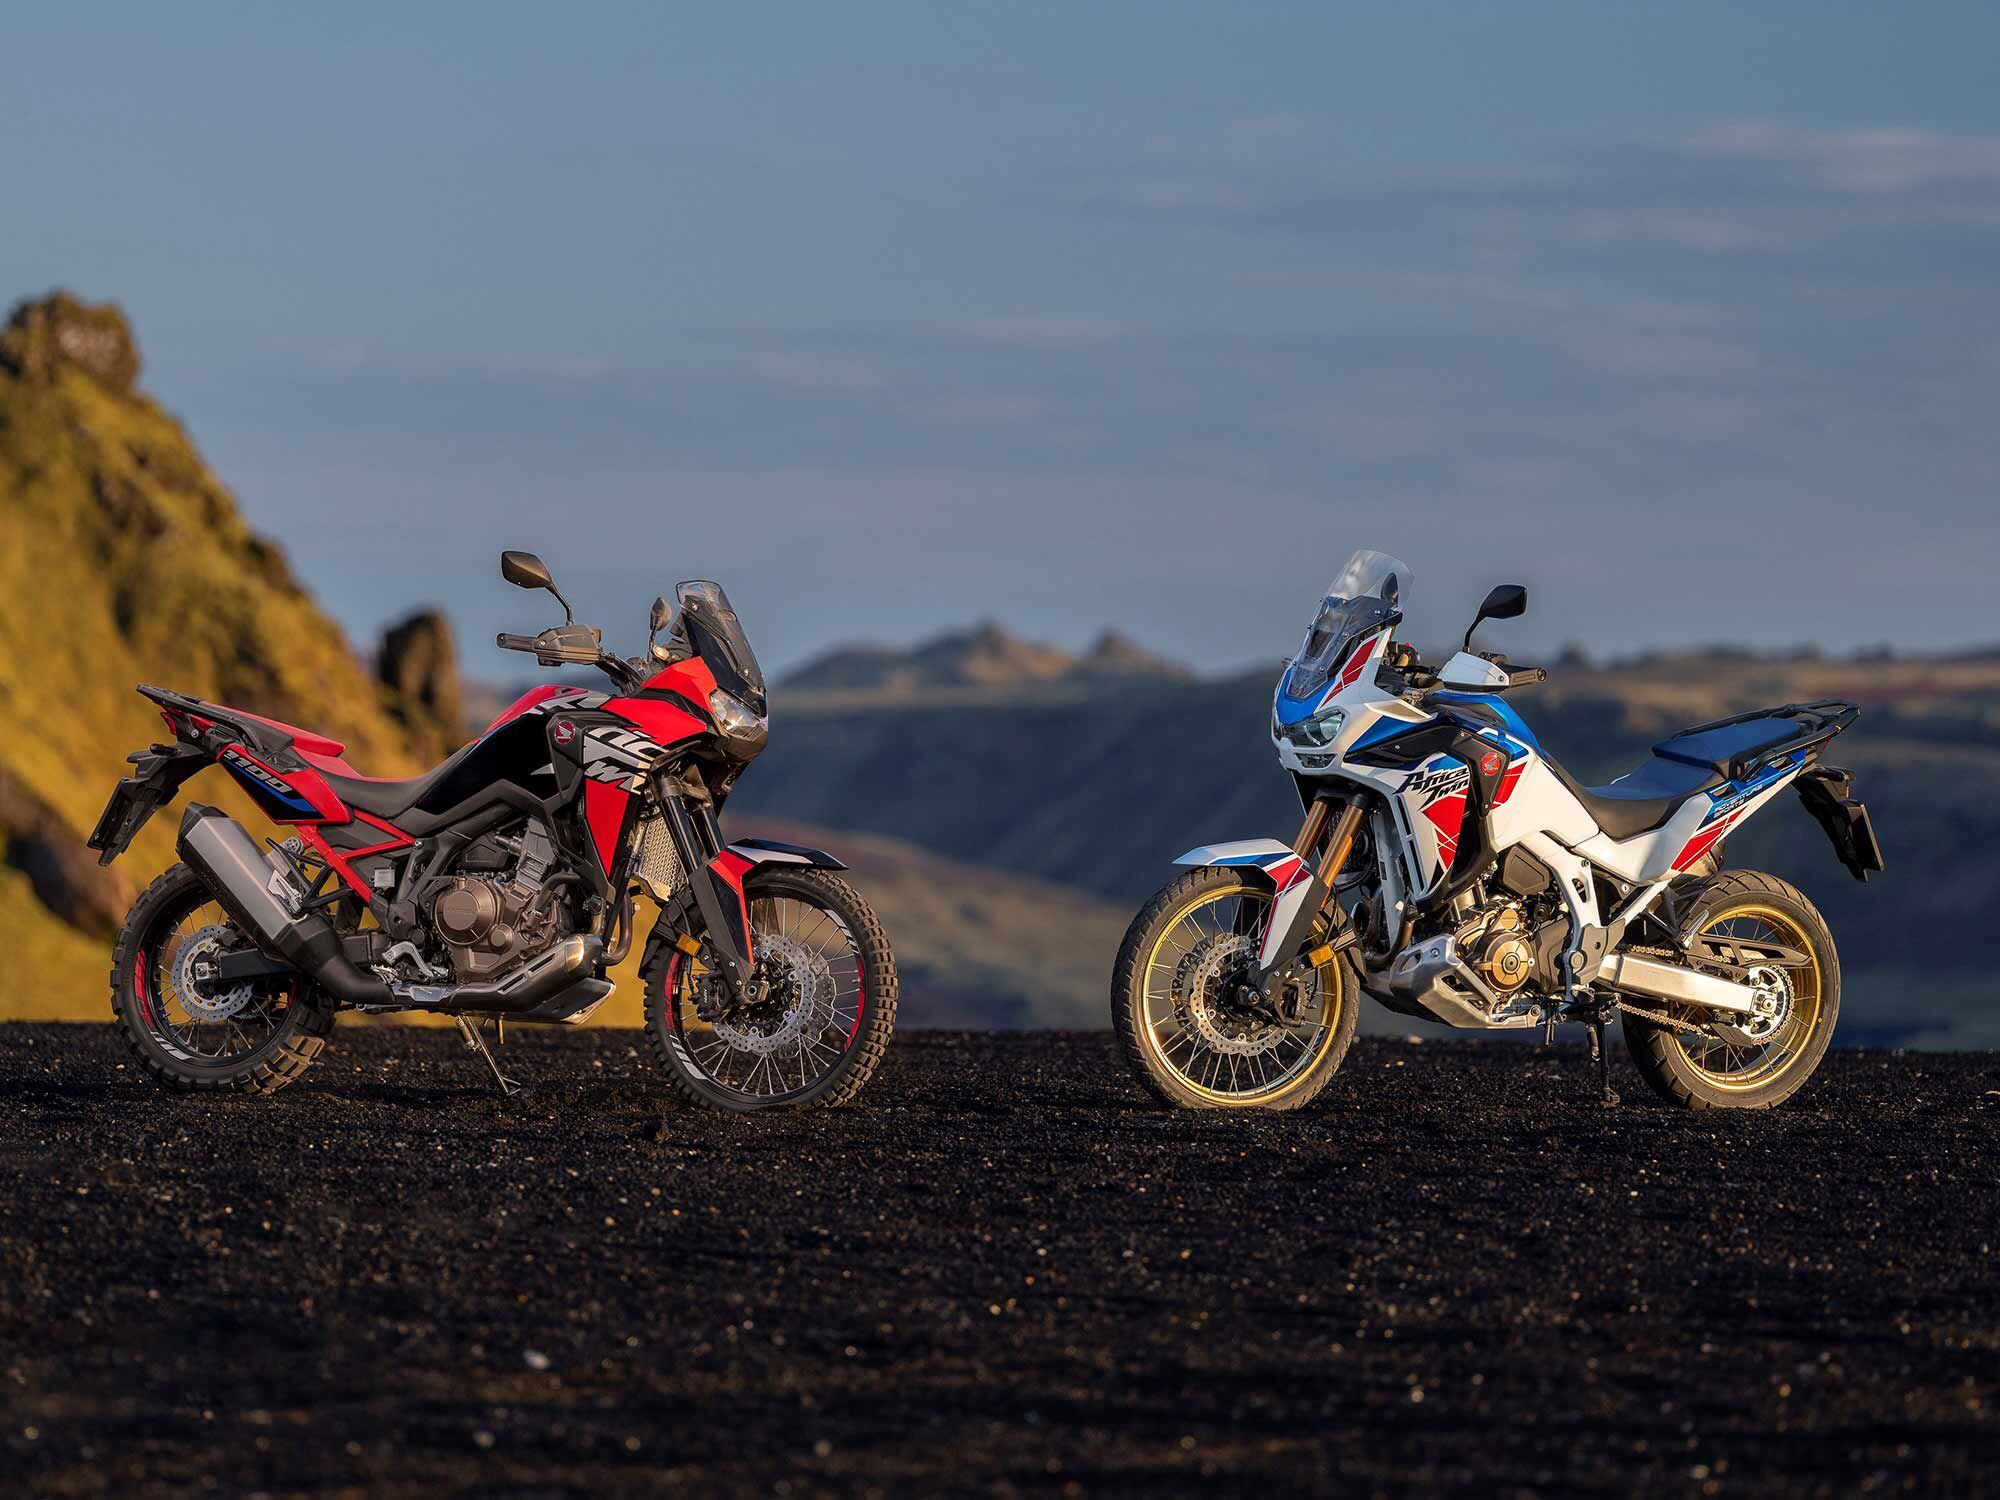 Honda’s Africa Twin gets lighter with more torque.